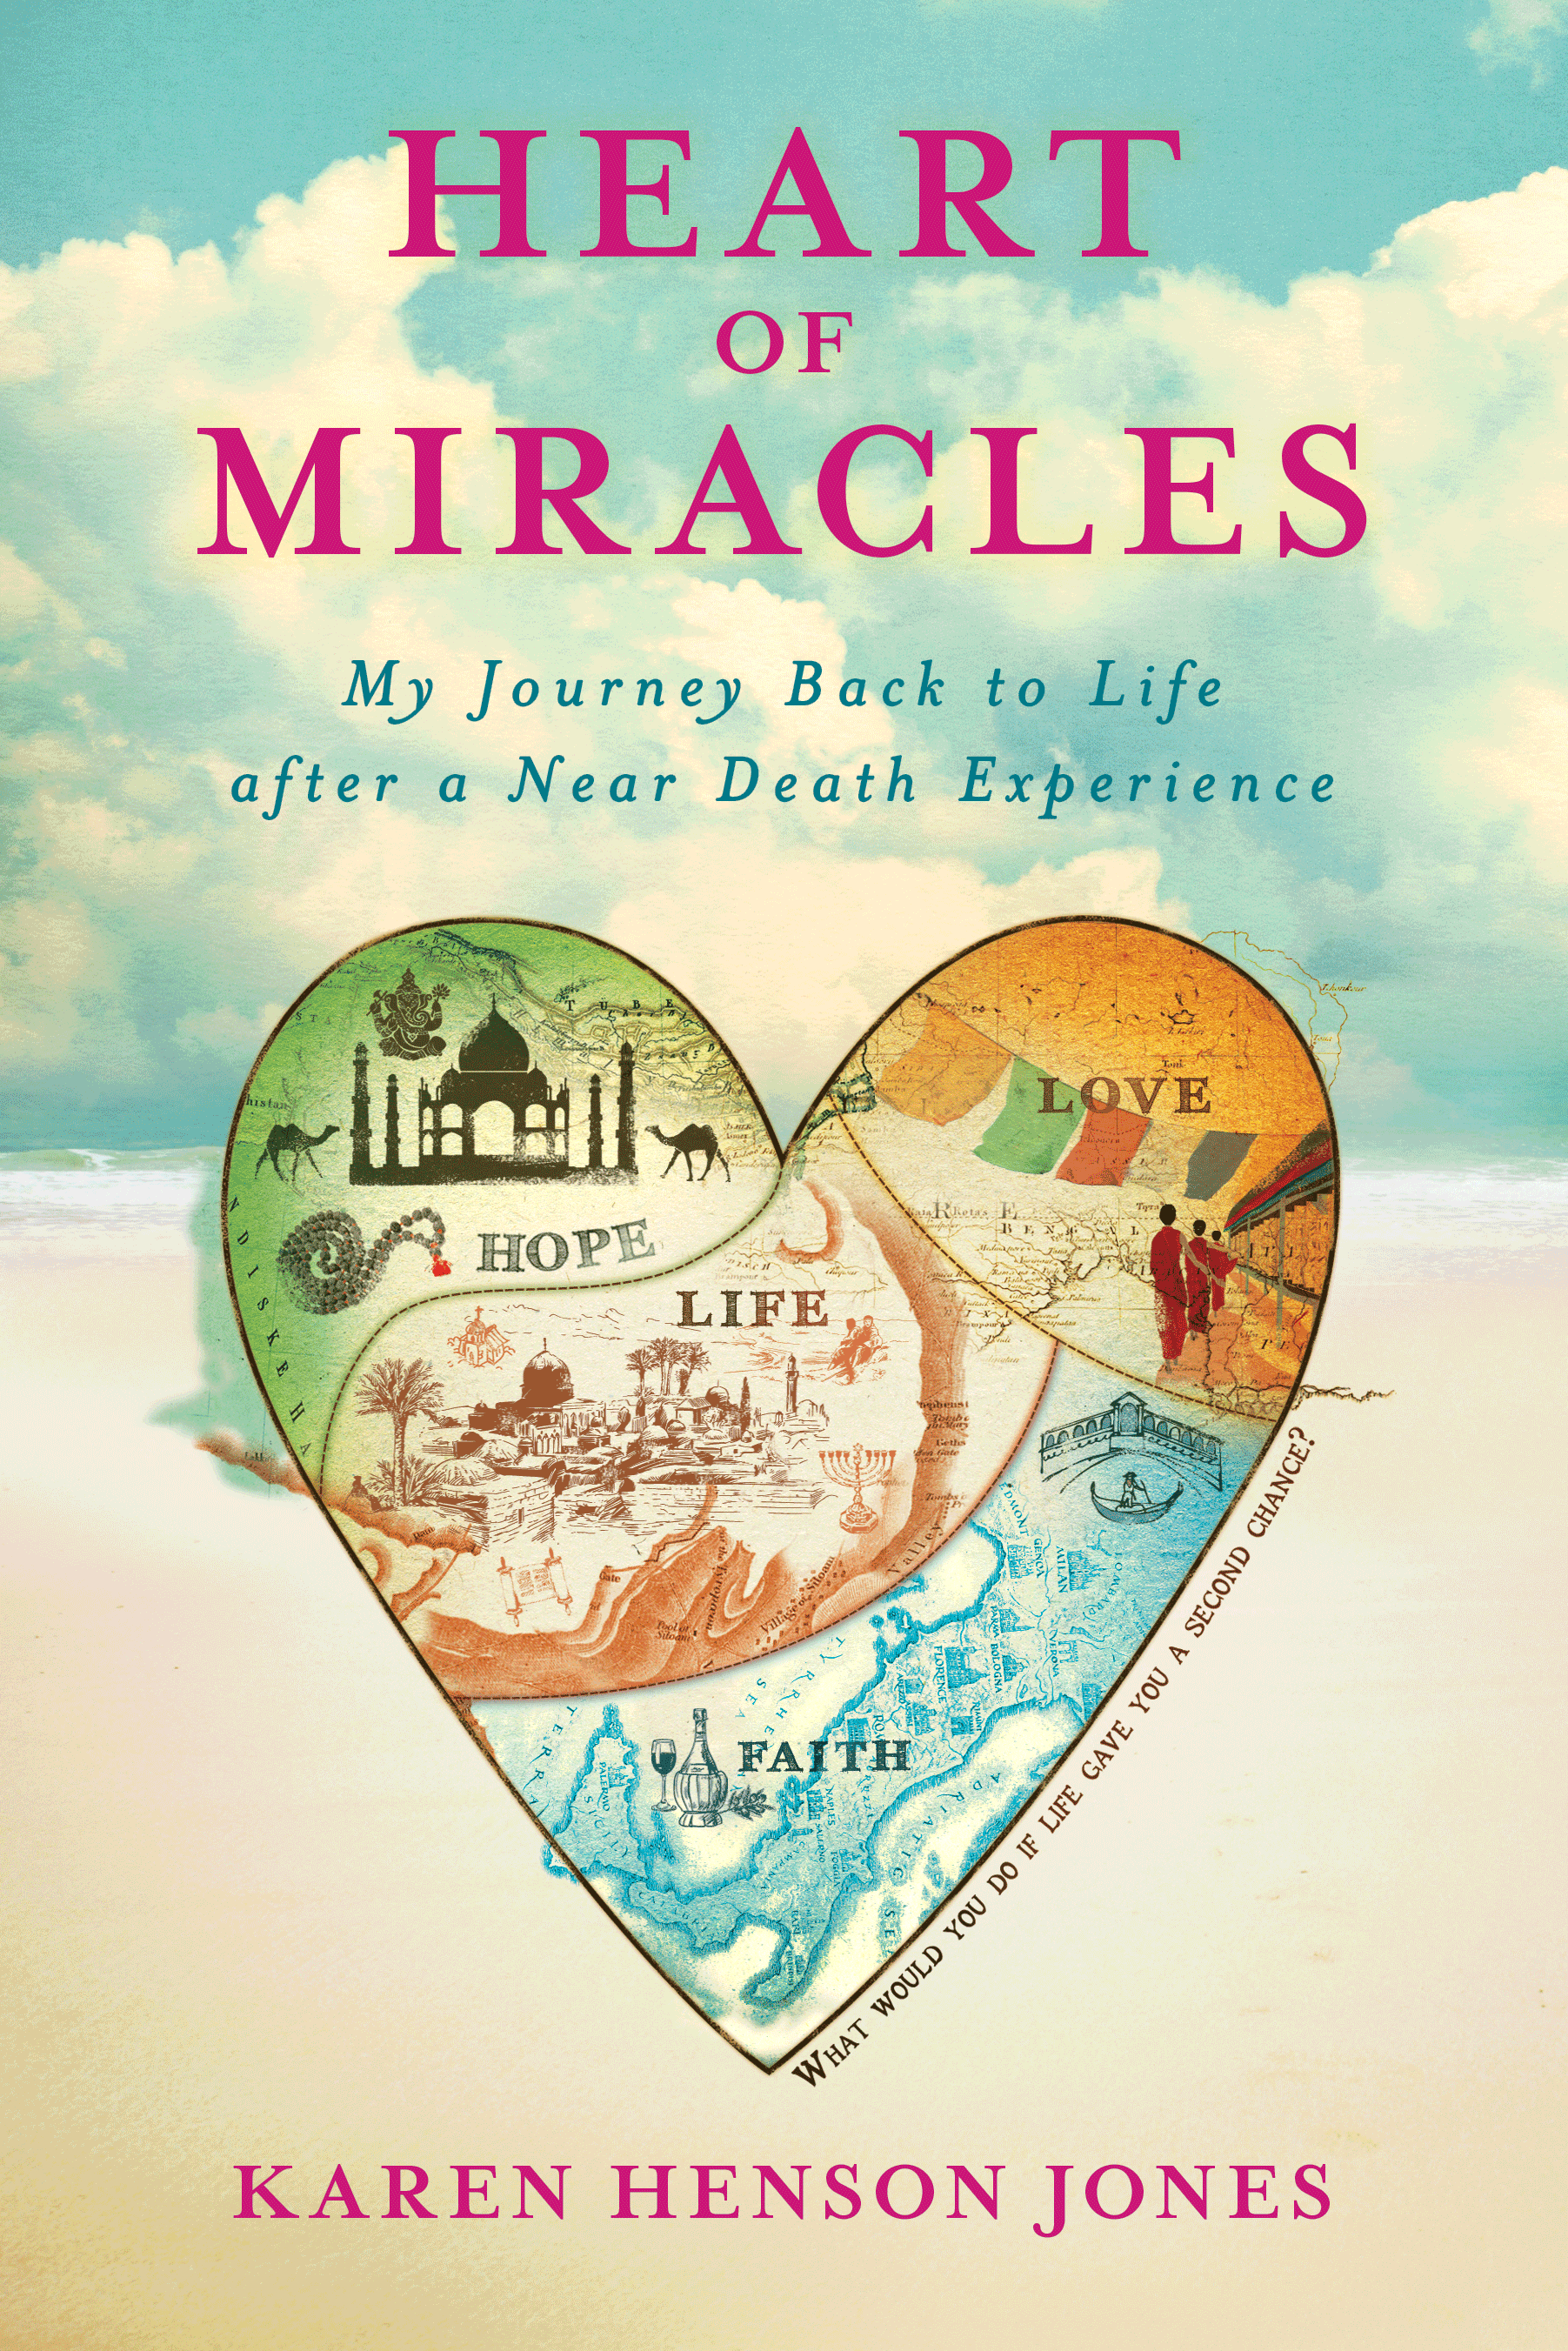 Back journey. Mir Journey. Henson Island обложка. A Miracle of the Heart book. My Miracle.